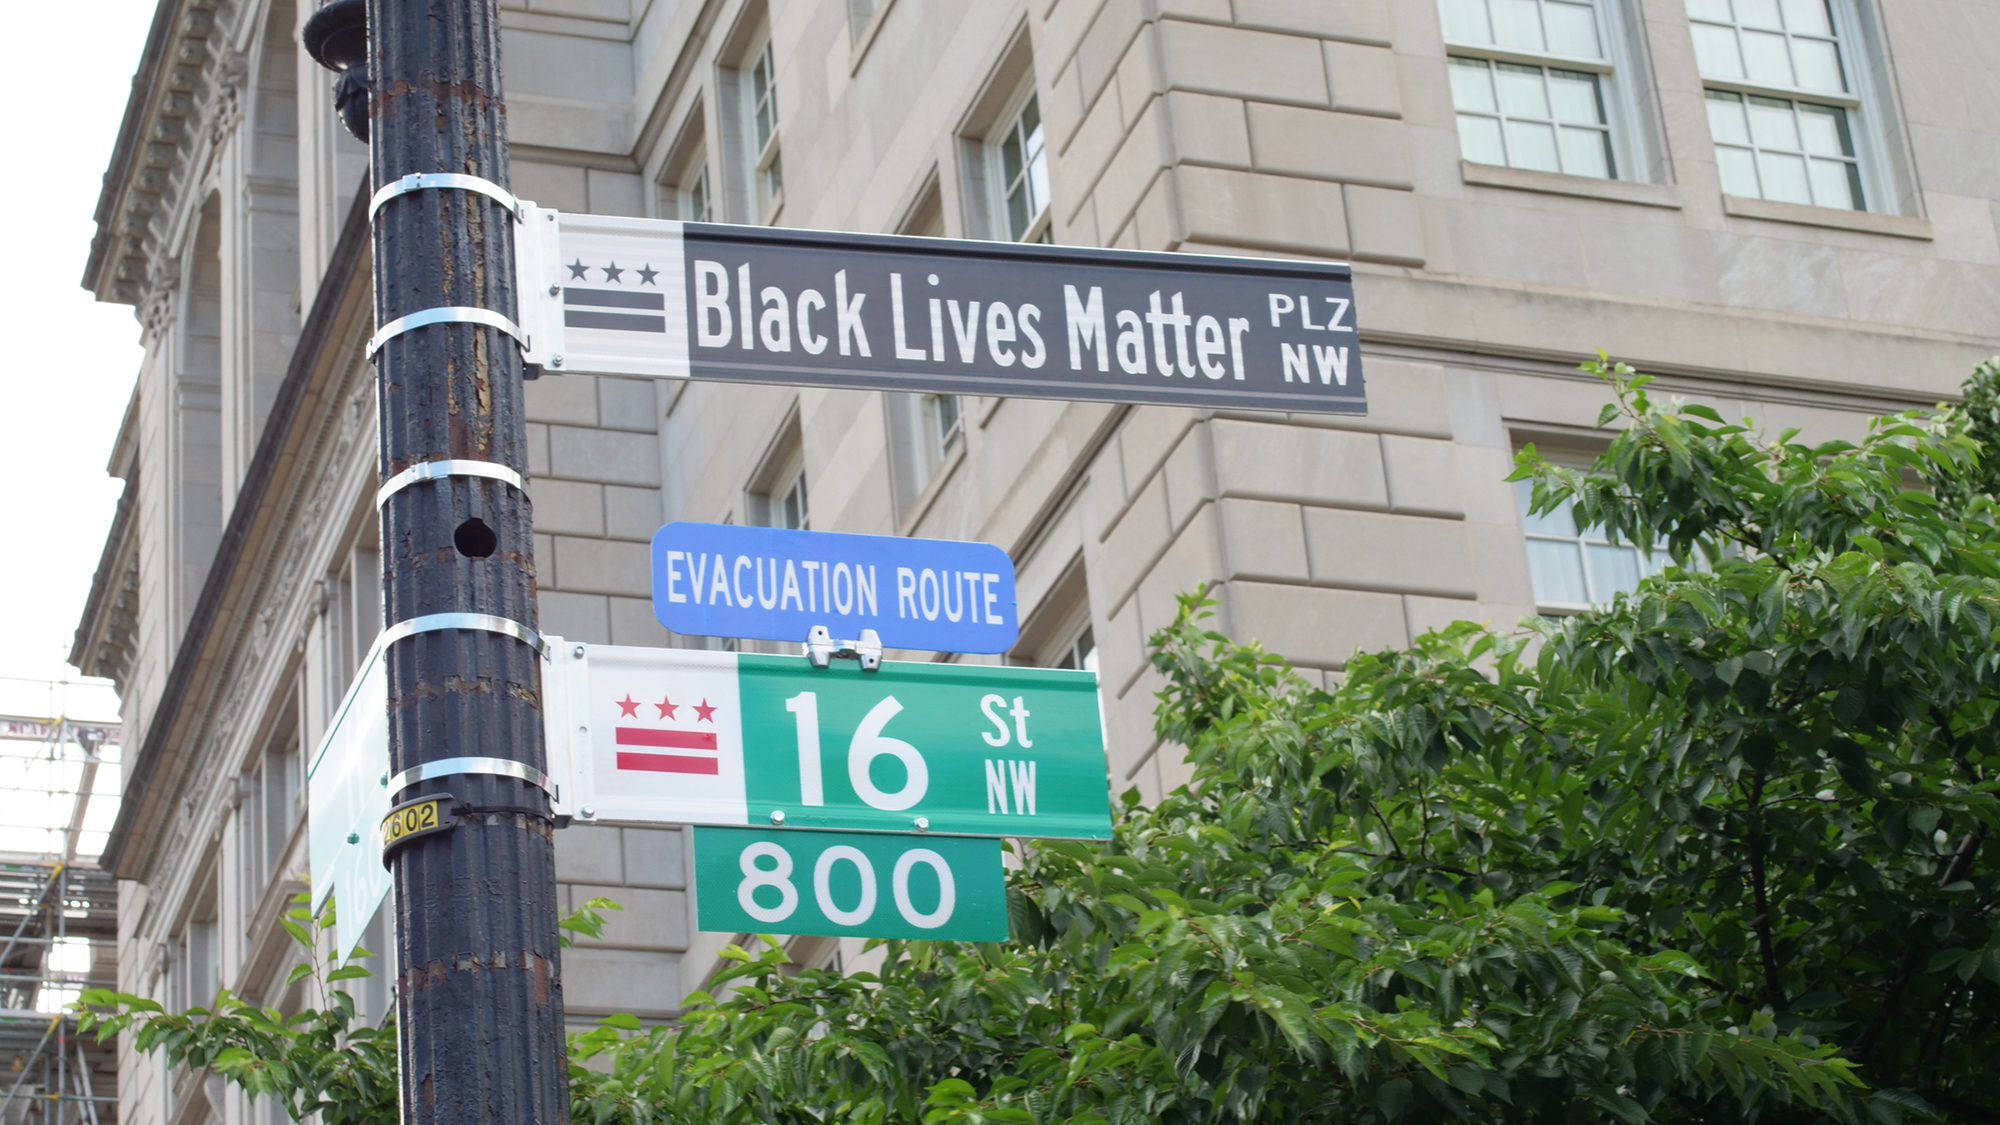 View of a building and street signs that say Black Lives Matter plaza and 16th Street